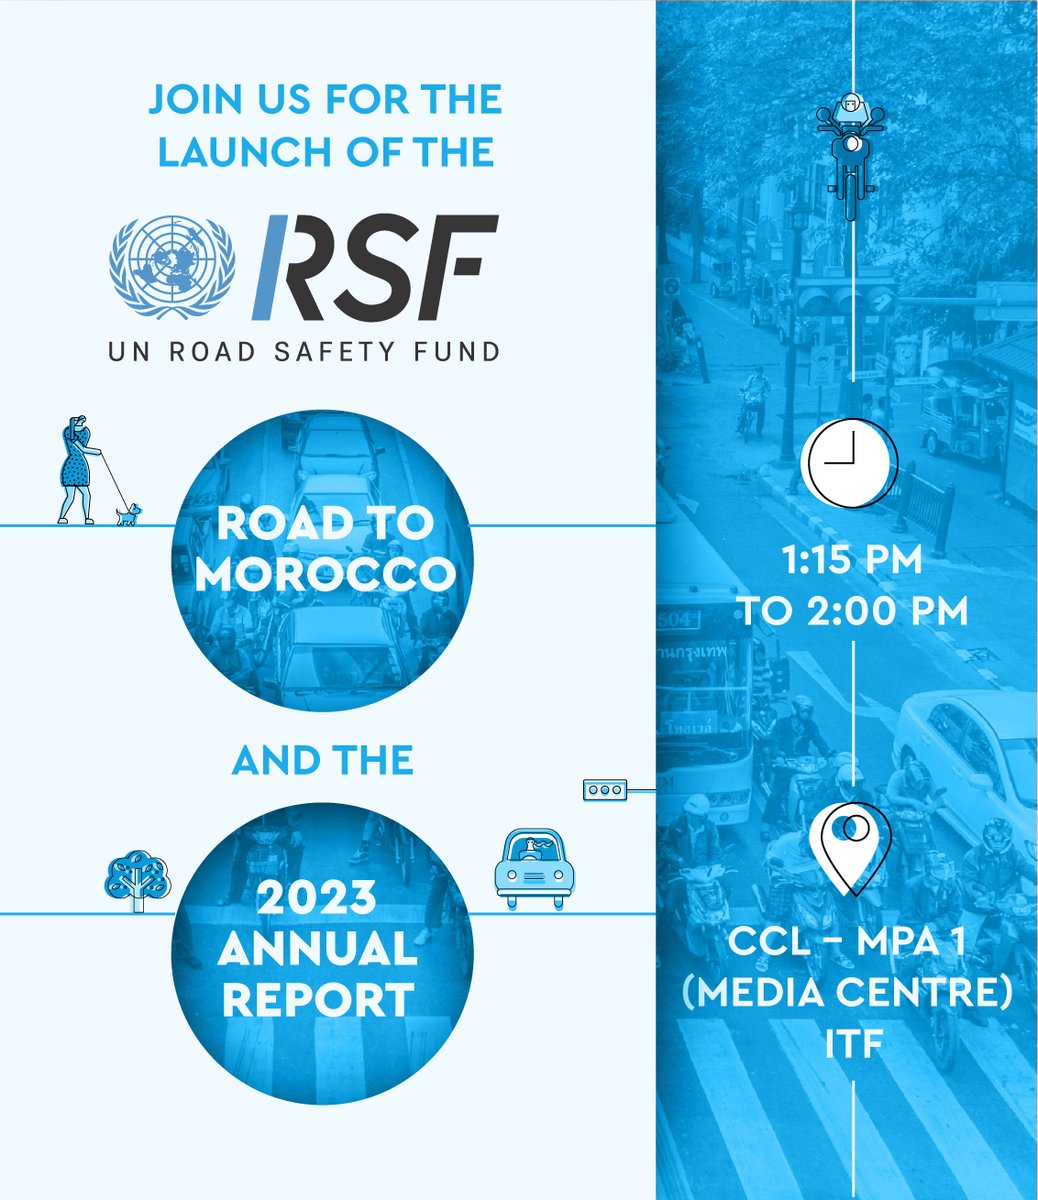 Are you in Leipzig #ITF24 today? 
Then join the @UN_RSF press conference today for the launch of the Road to Morocco High-level Pledging Forum and the 2023 Annual Report. 
⏰13:15 - 14:00
📍Summit Media Centre